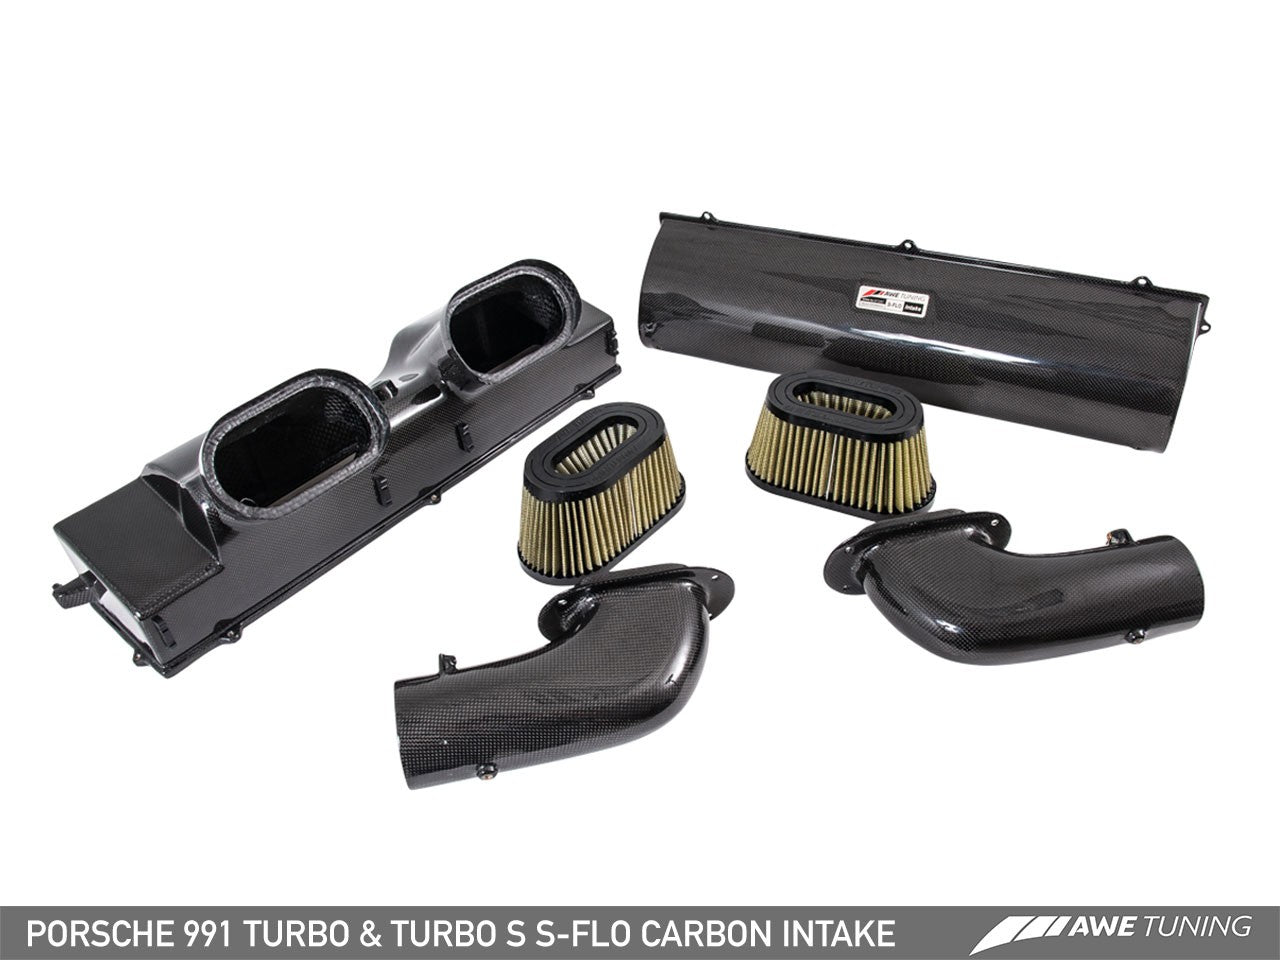 AWE S-FLO Carbon Intake for Porsche 991 Turbo and Turbo S